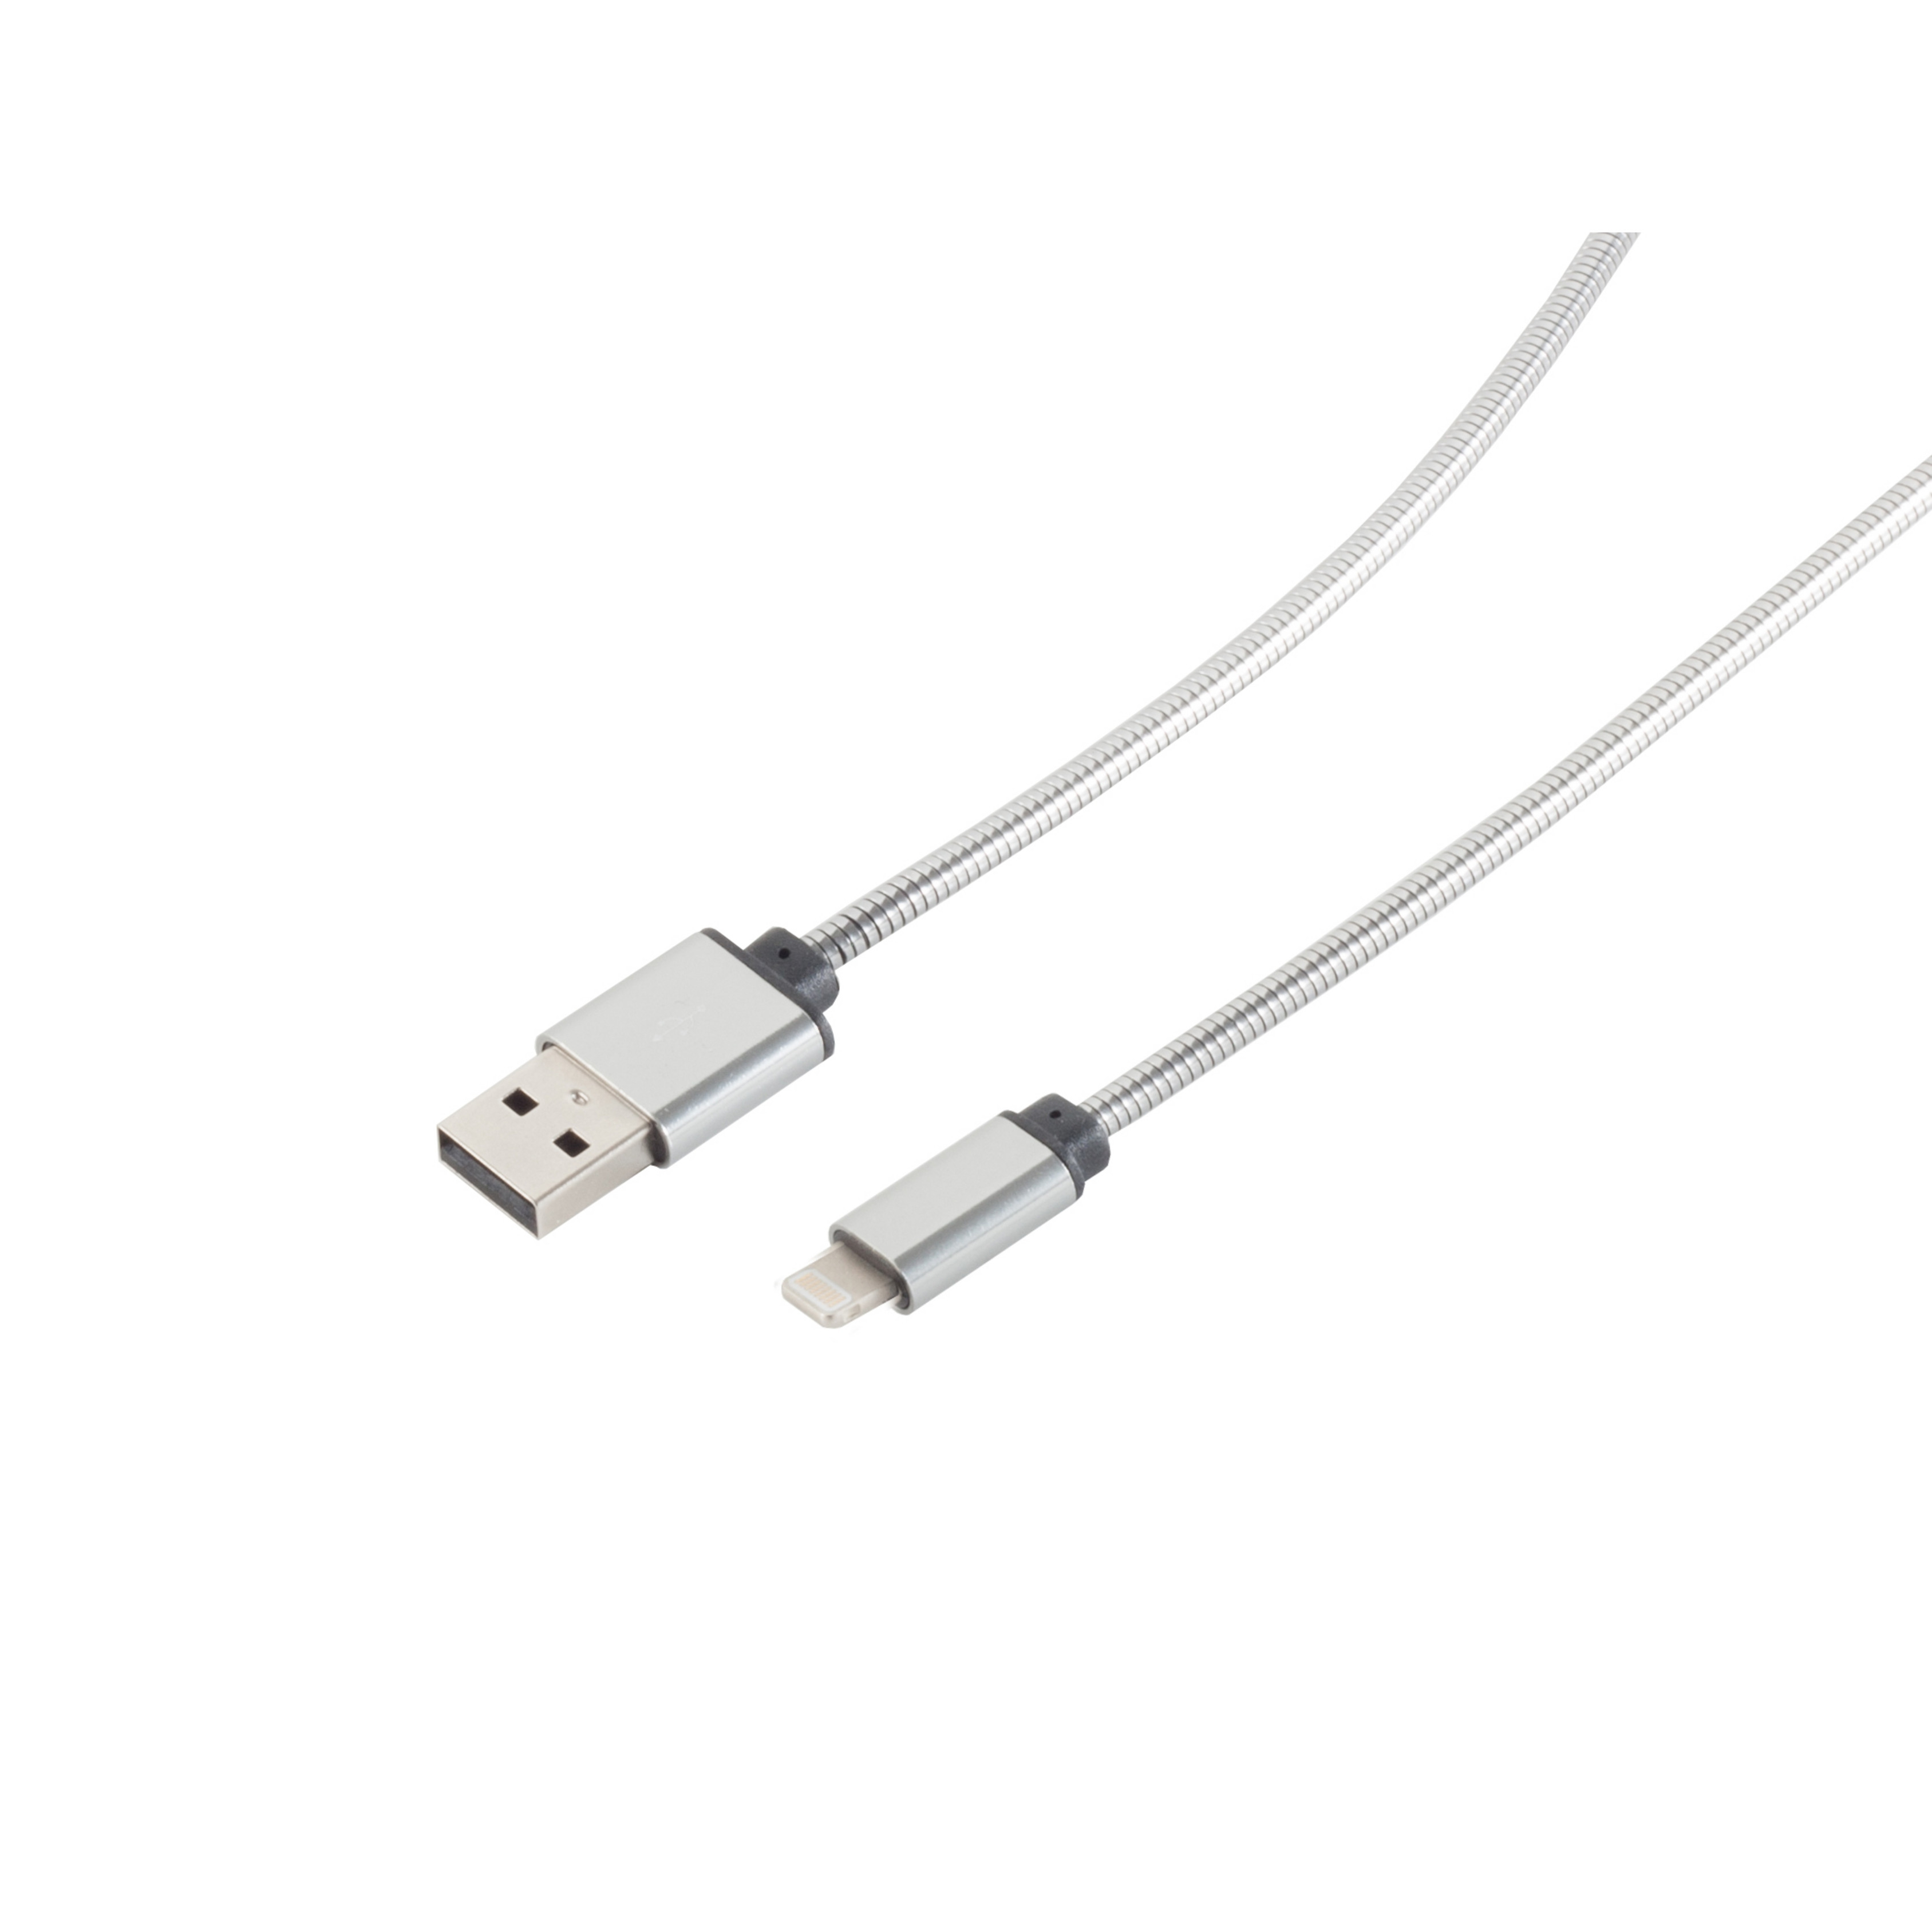 S/CONN MAXIMUM Steel USB USB 1,6m USB 8-pin Kabel Lade-Sync Silber A/ CONNECTIVITY Kabel